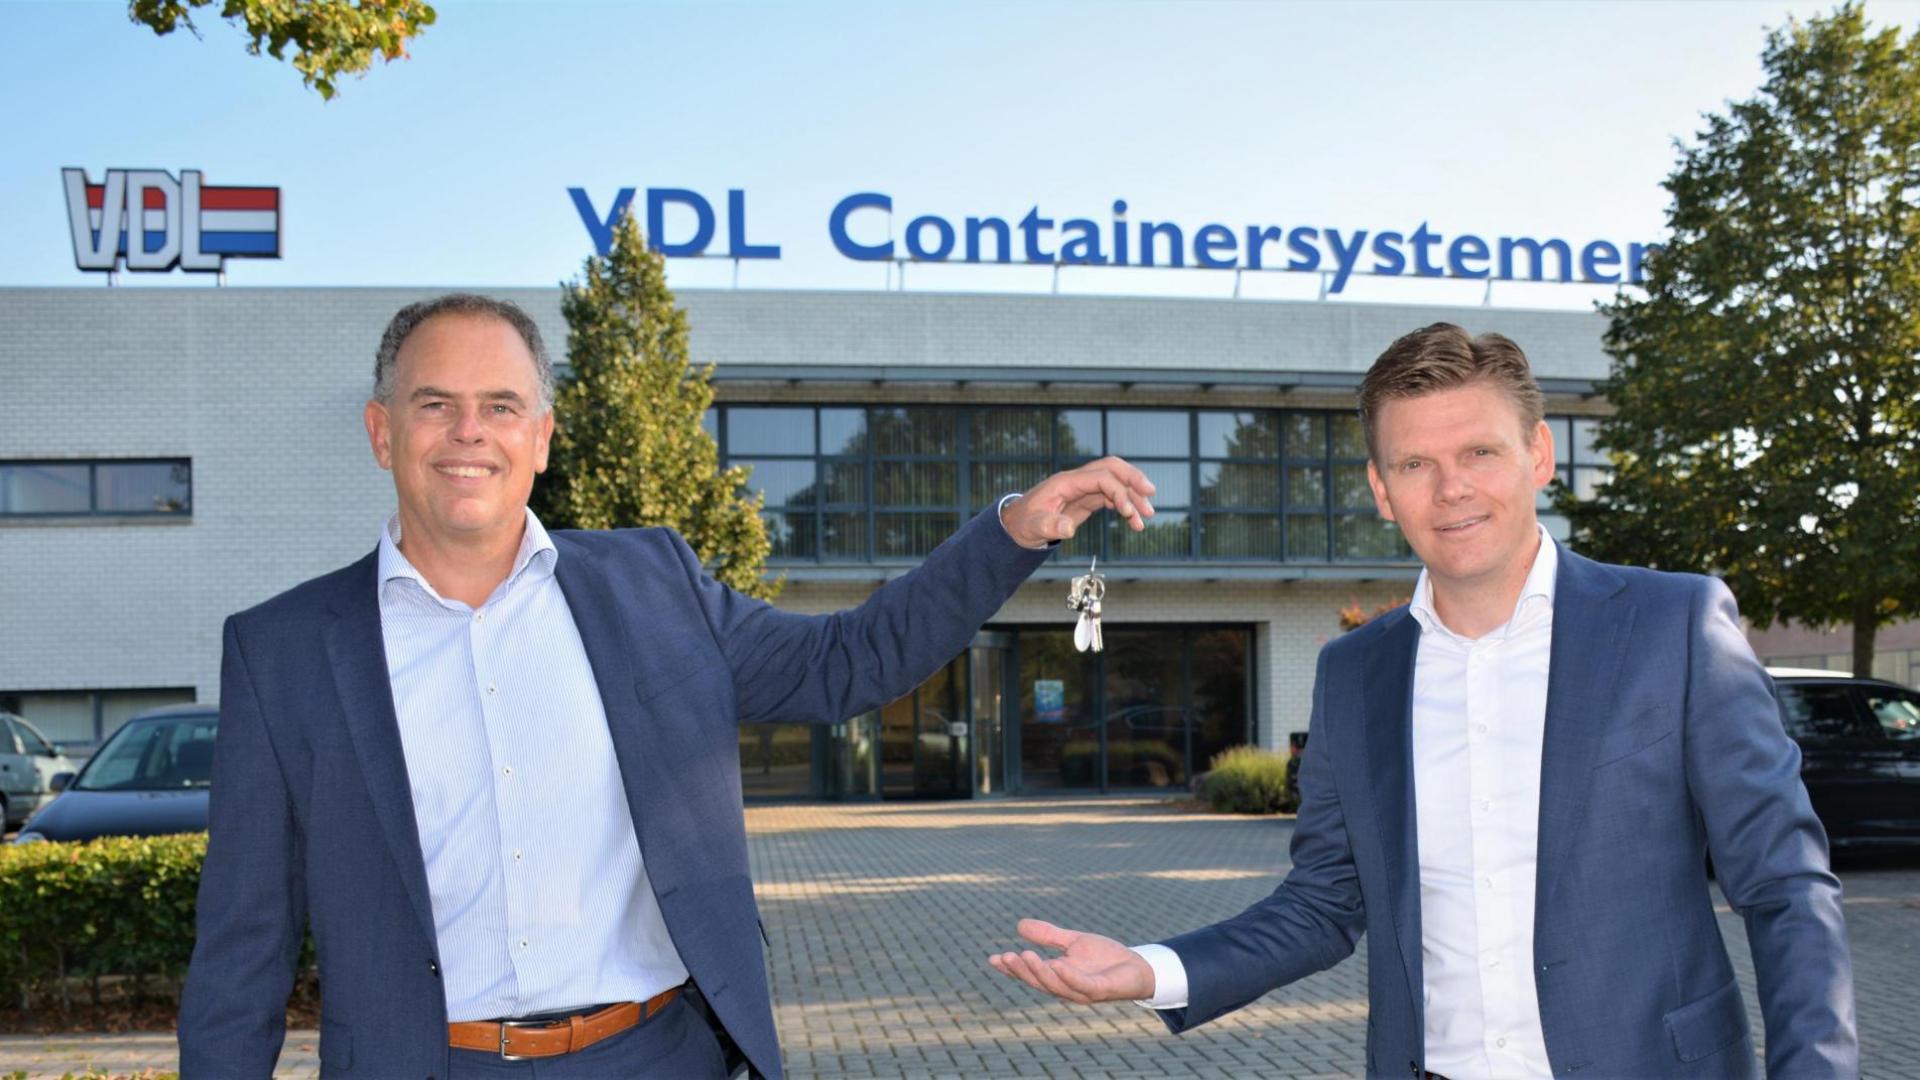 New managing director at VDL Containersystemen